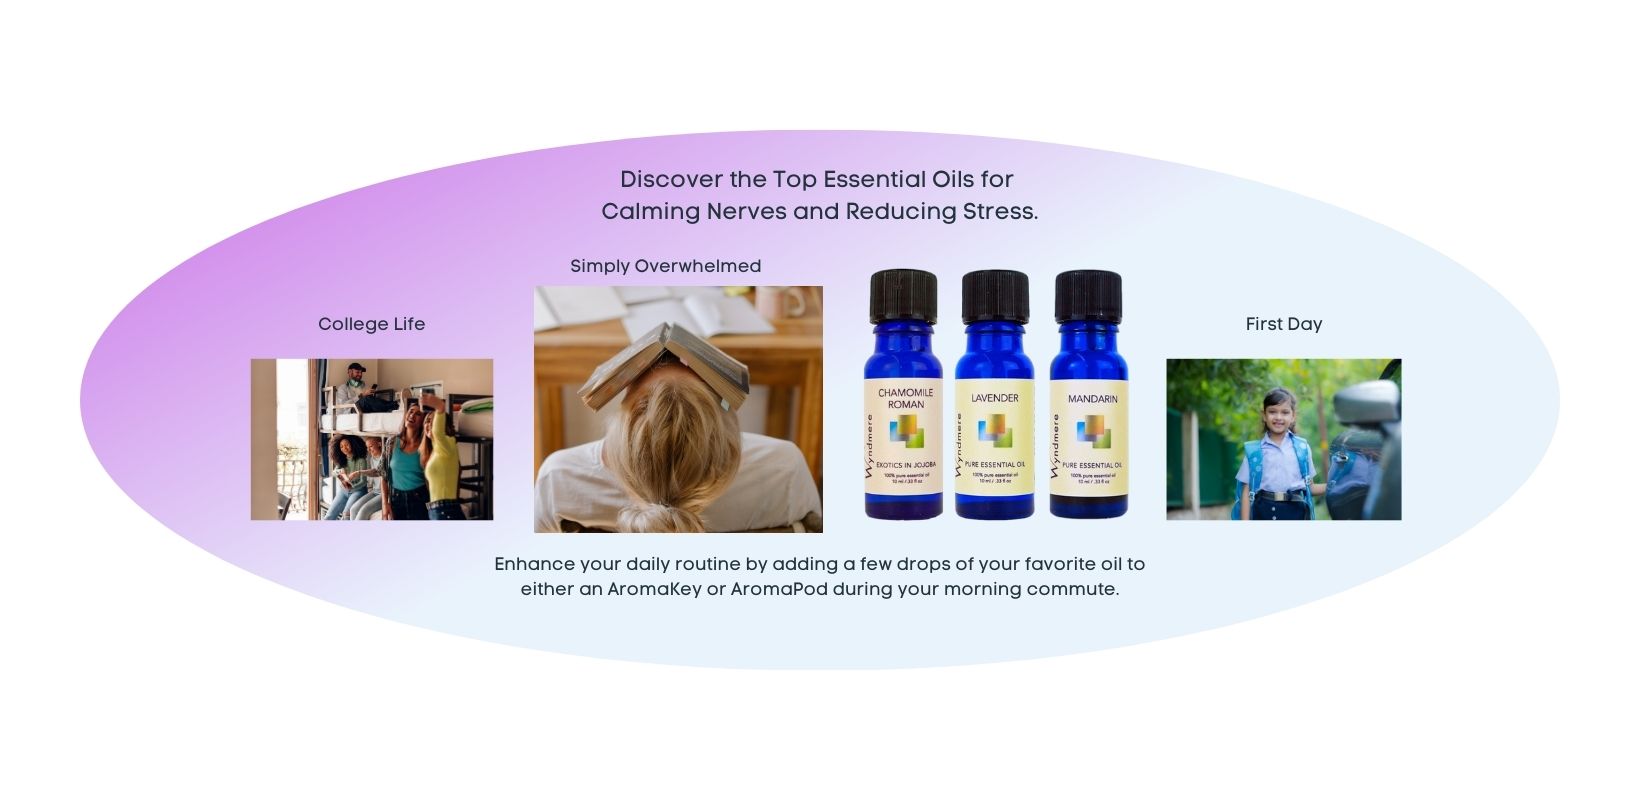 Top Essential Oils for Calming Nerves and Reducing Stress